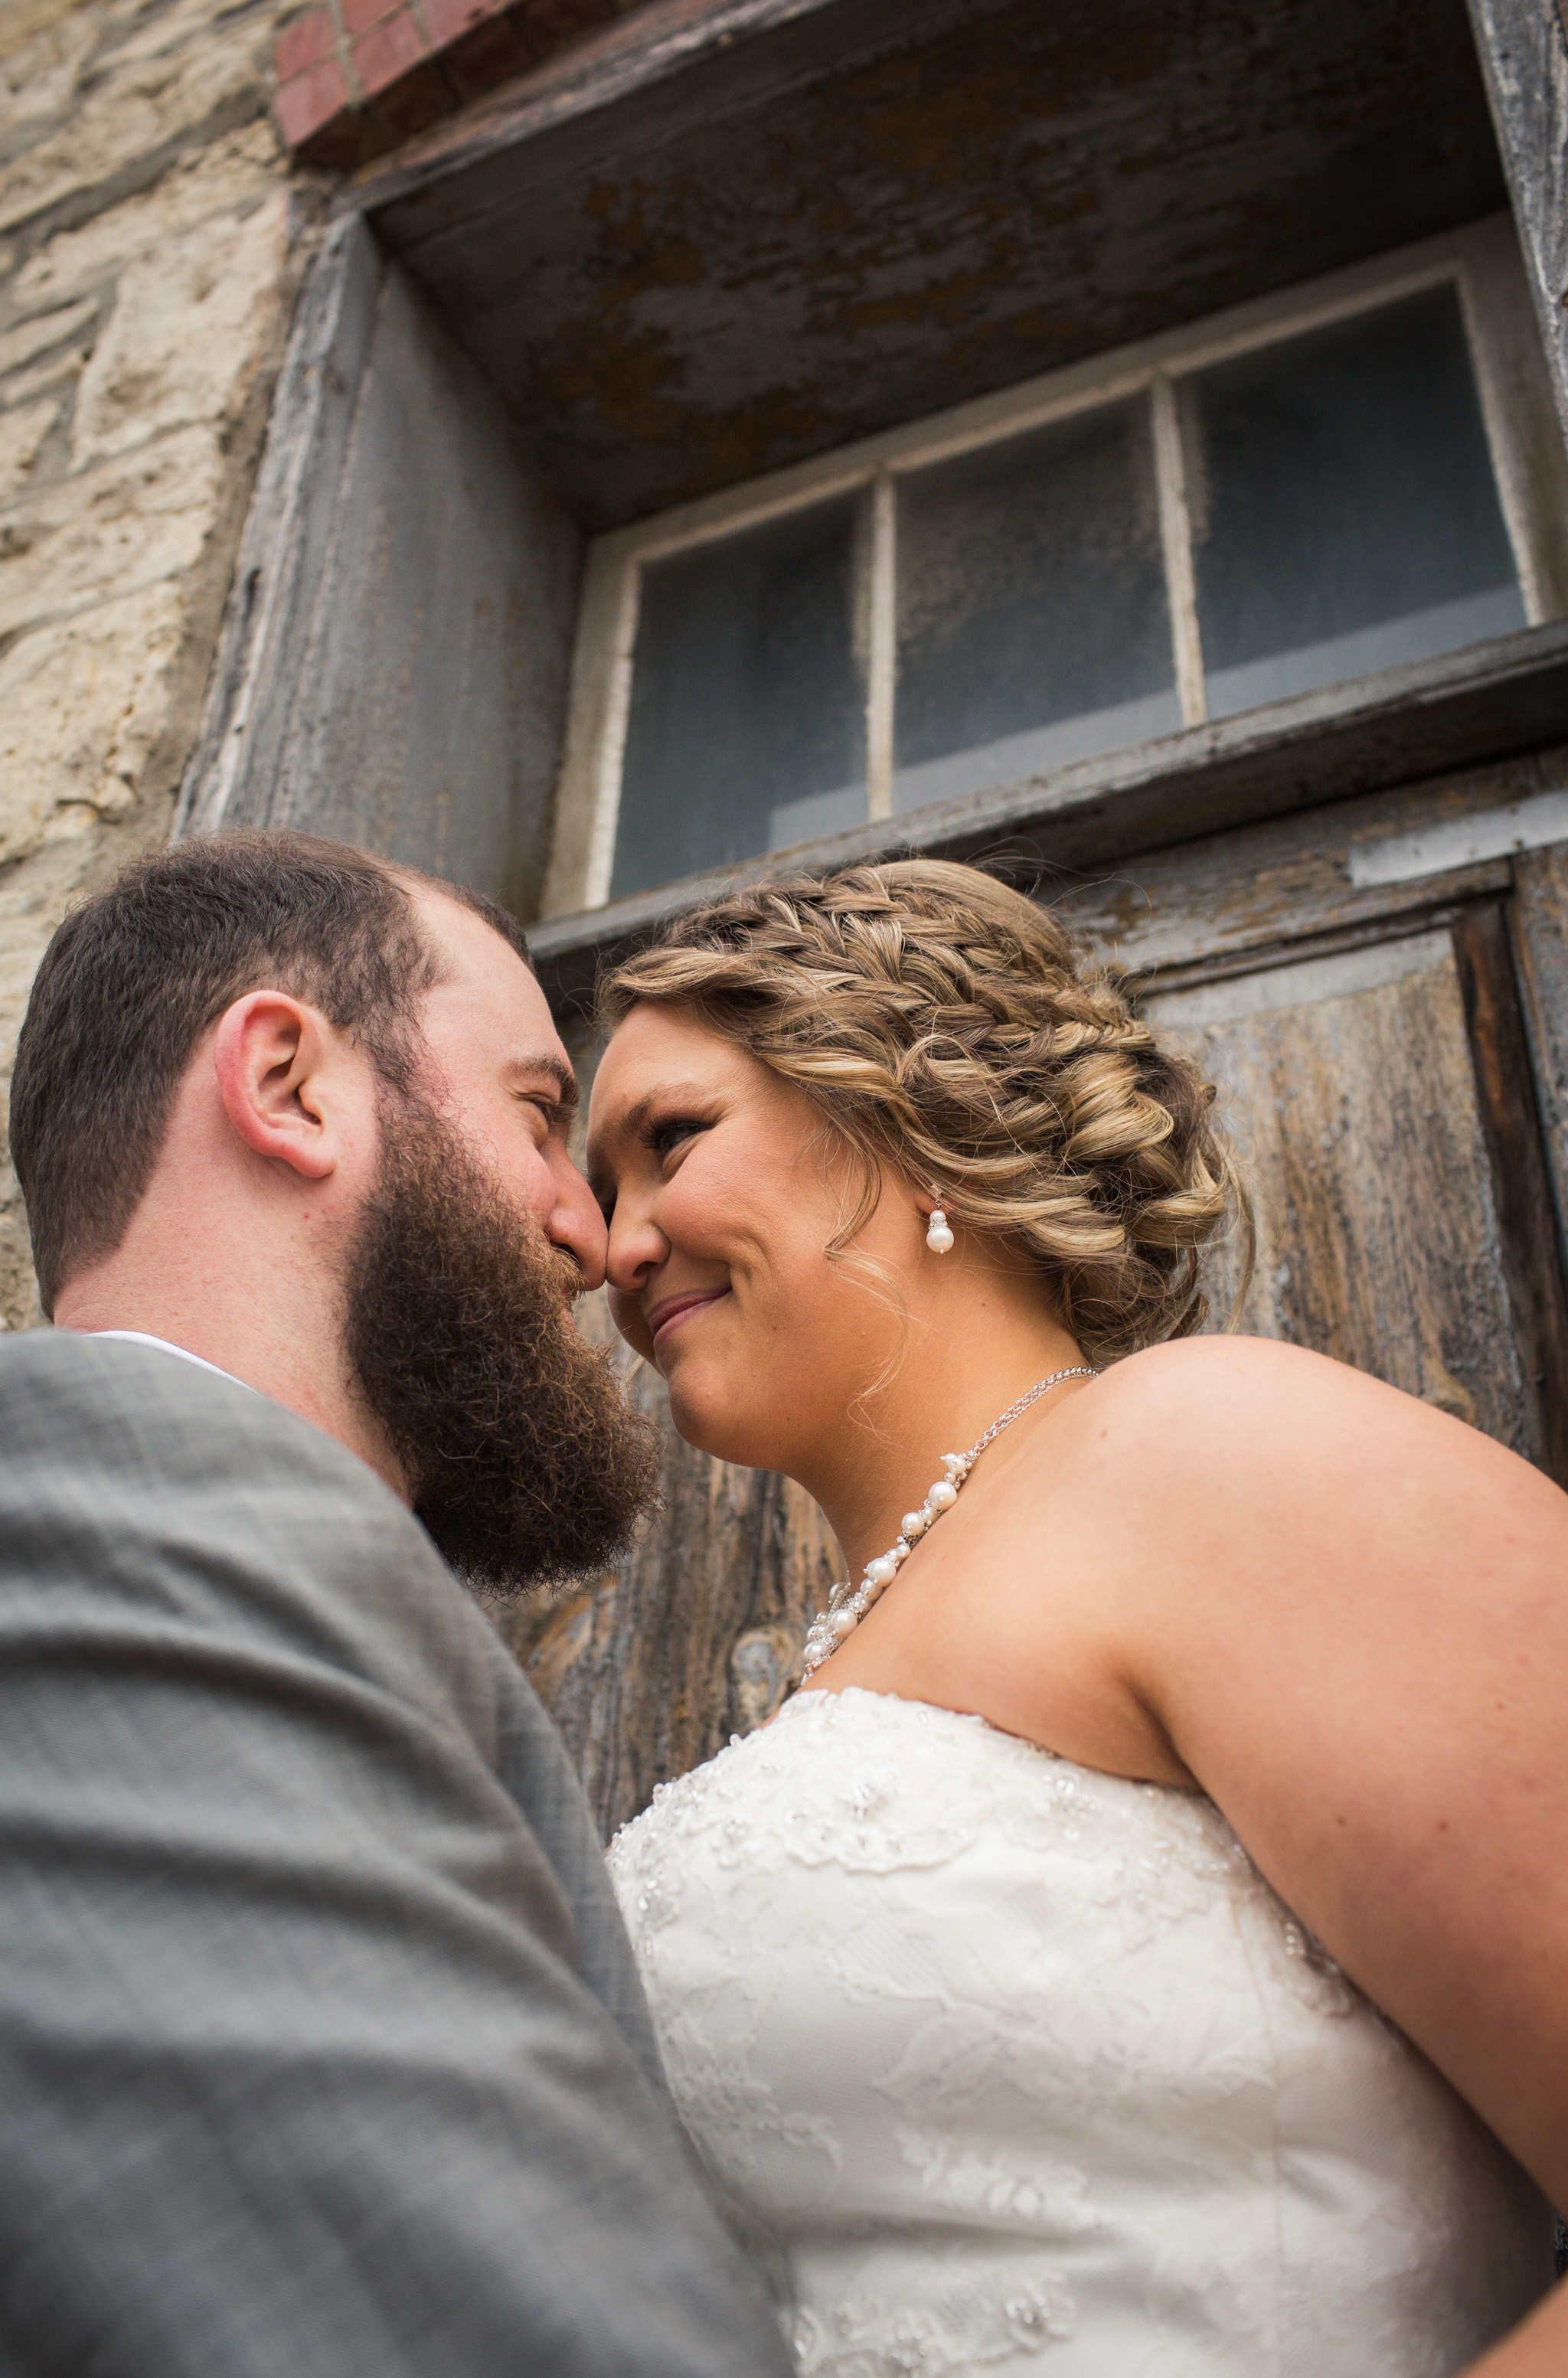 Zibell Spring Wedding, Bride and Groom, Powerful, Connected, Exploration, Laura Duggleby Photography -97.JPG